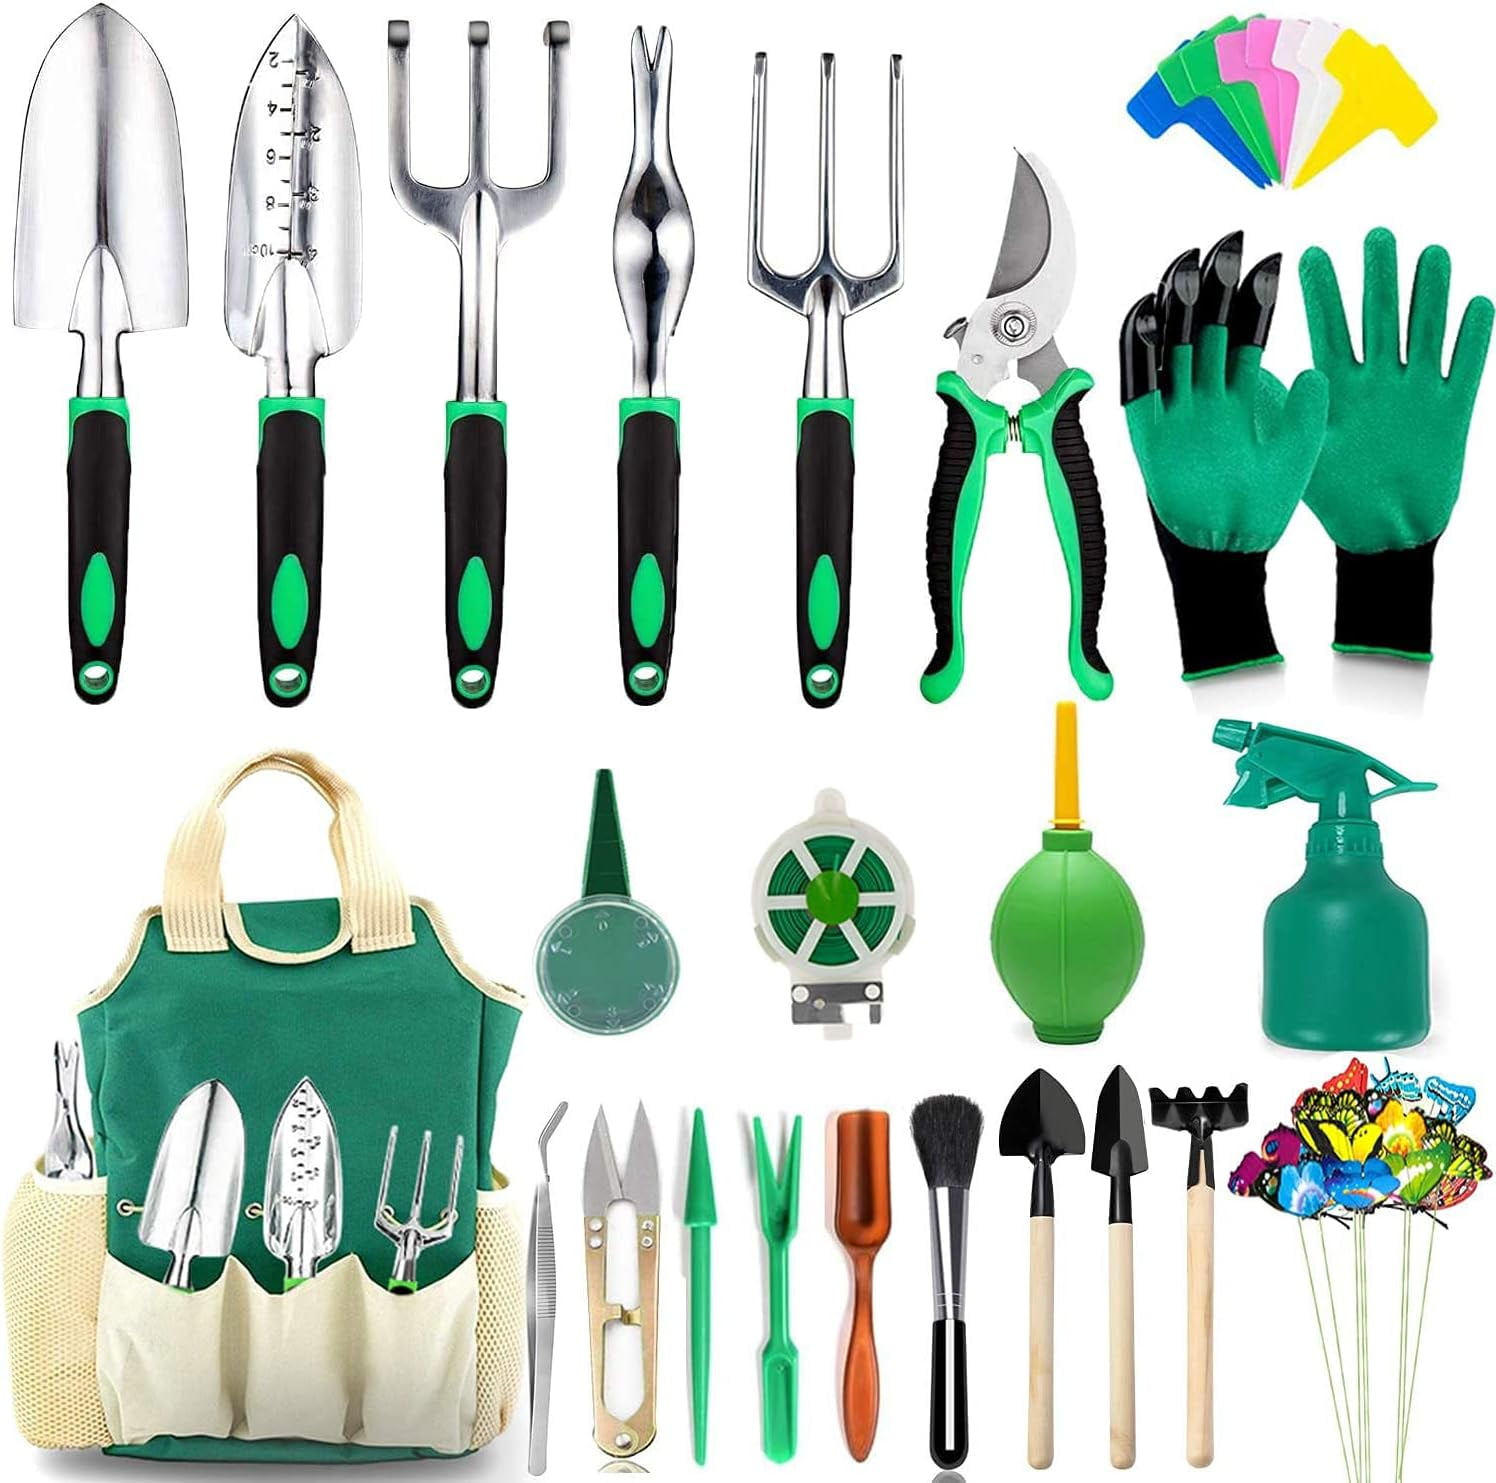 Adefol Garden Tool Spare Parts Store - Amazing products with